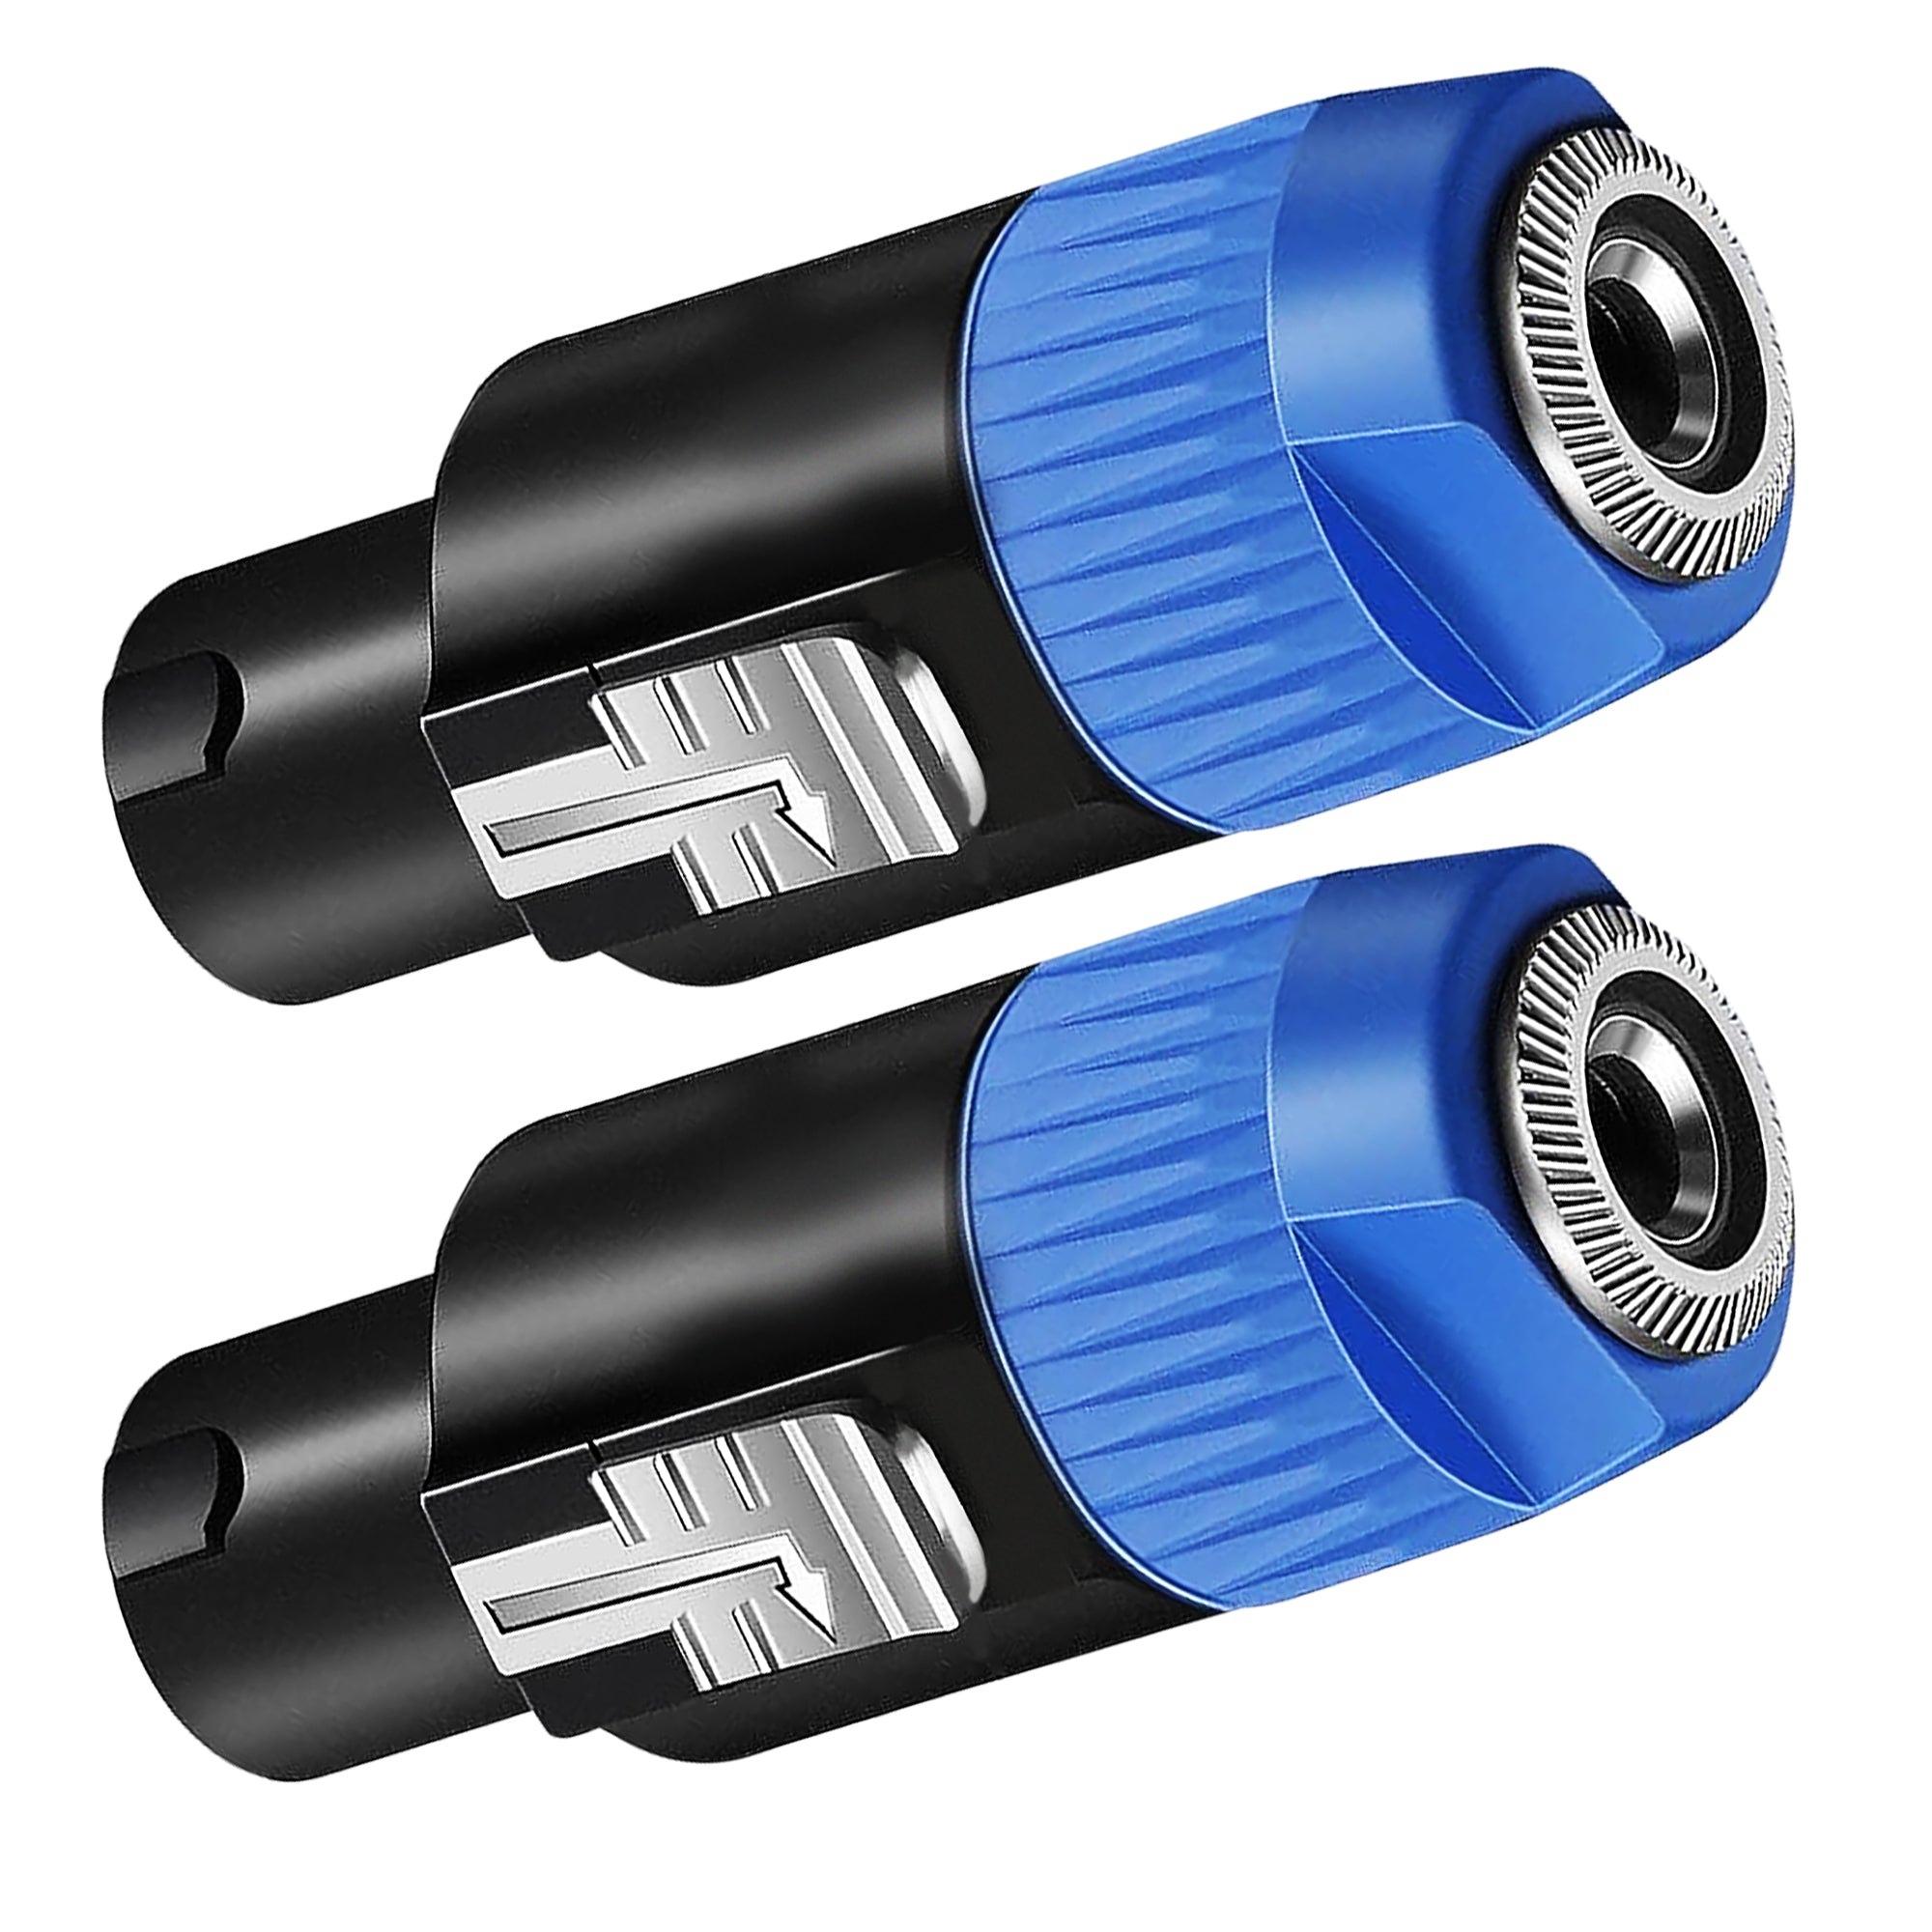 5 Core Speakon Adapter • High Quality Audio Jack Male Audio Pin • Speaker Adapter Connector 2/4 Pc